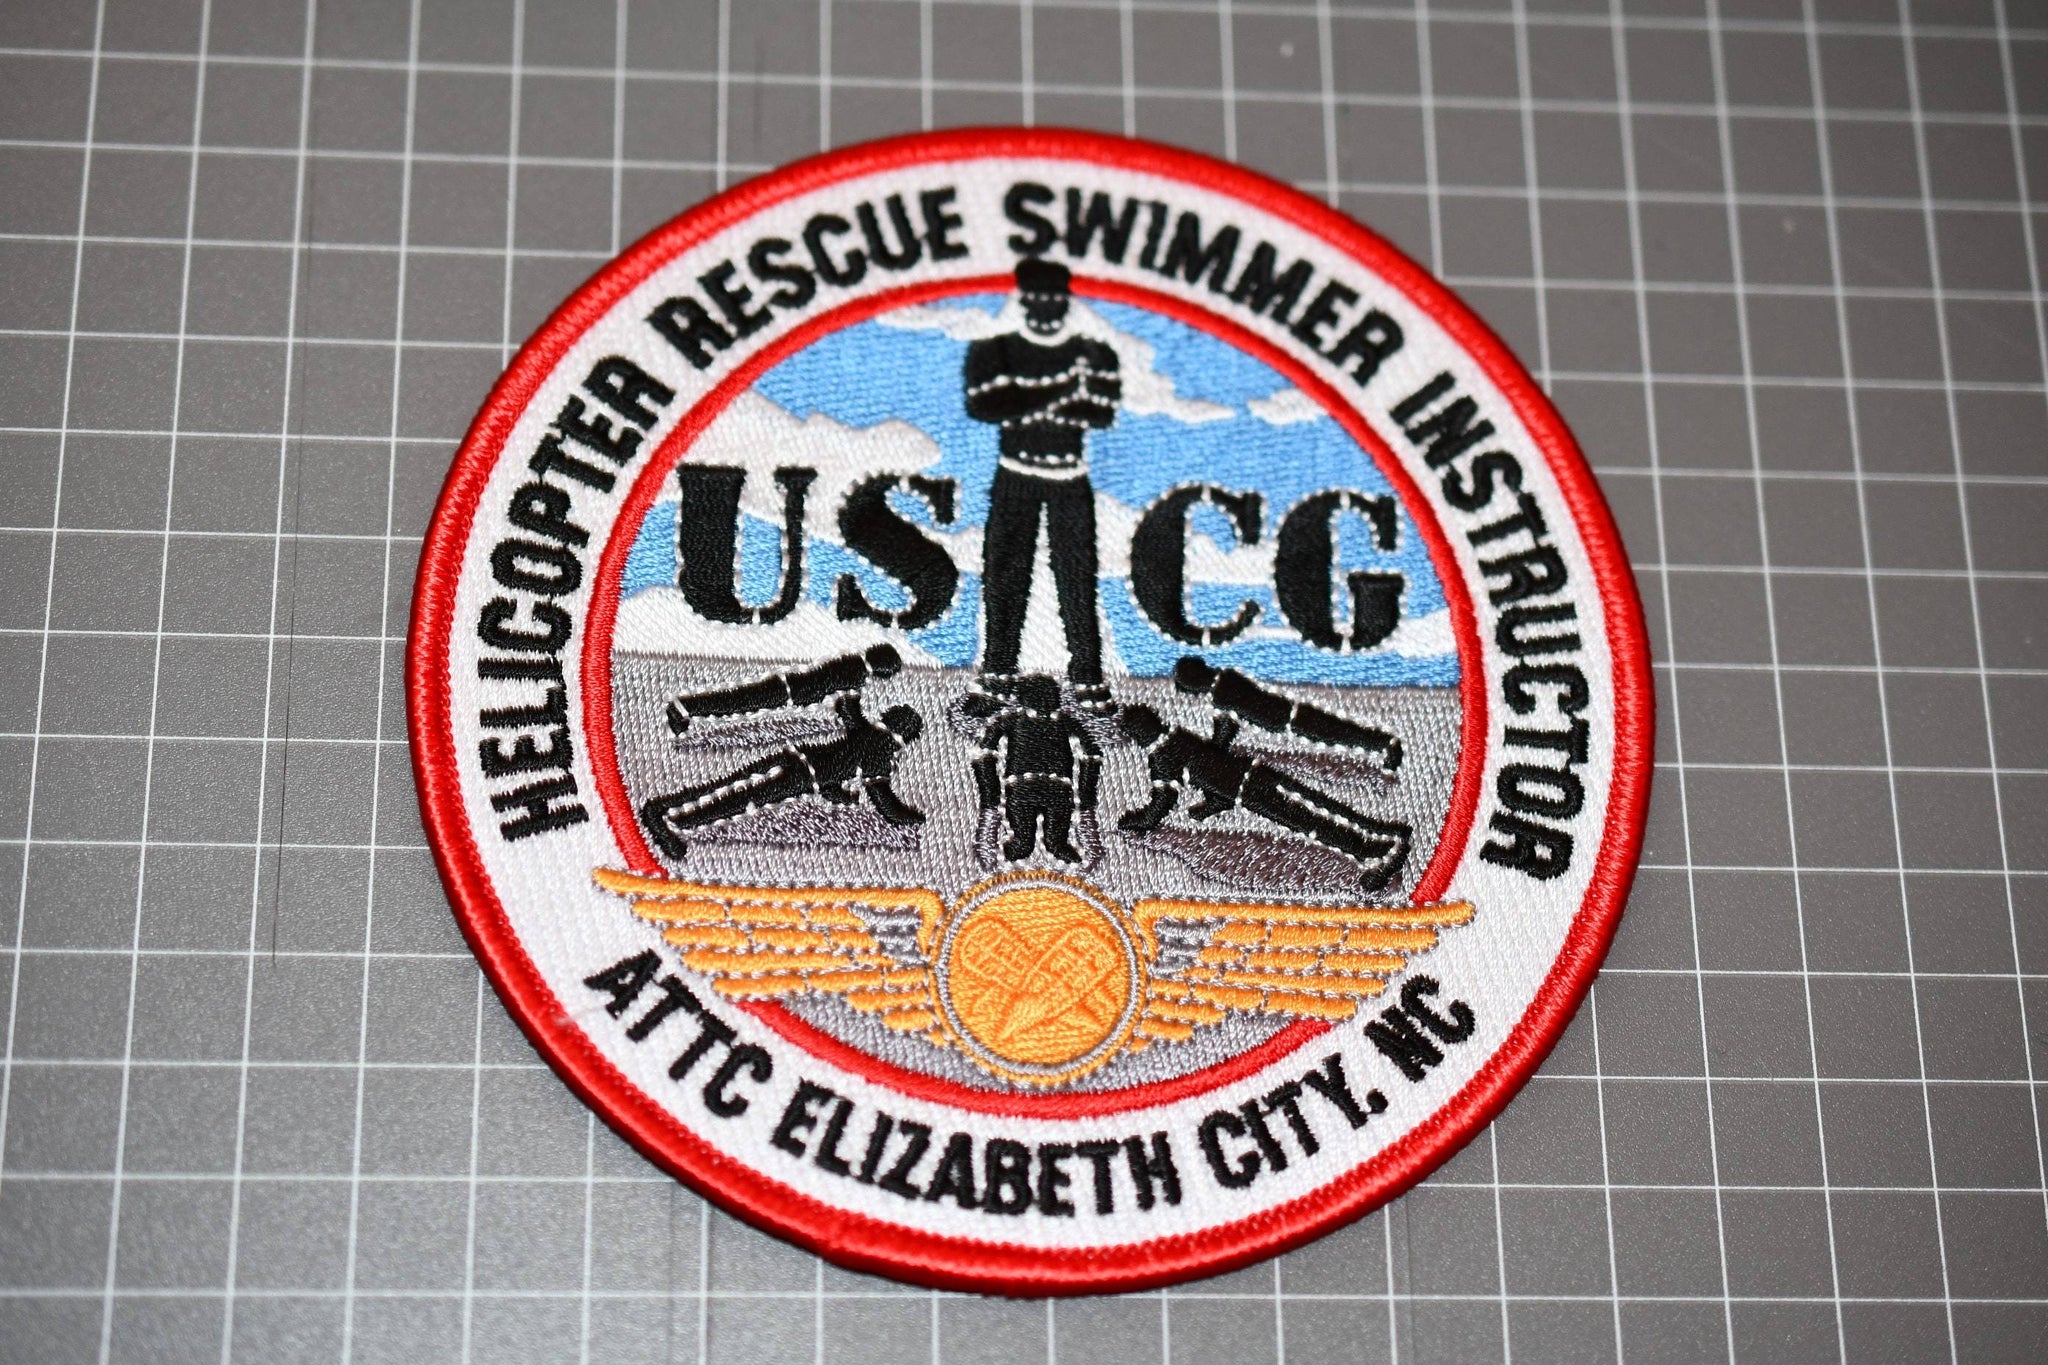 United States Coast Guard Helicopter Rescue Swimmer Instructor Patch (B5)